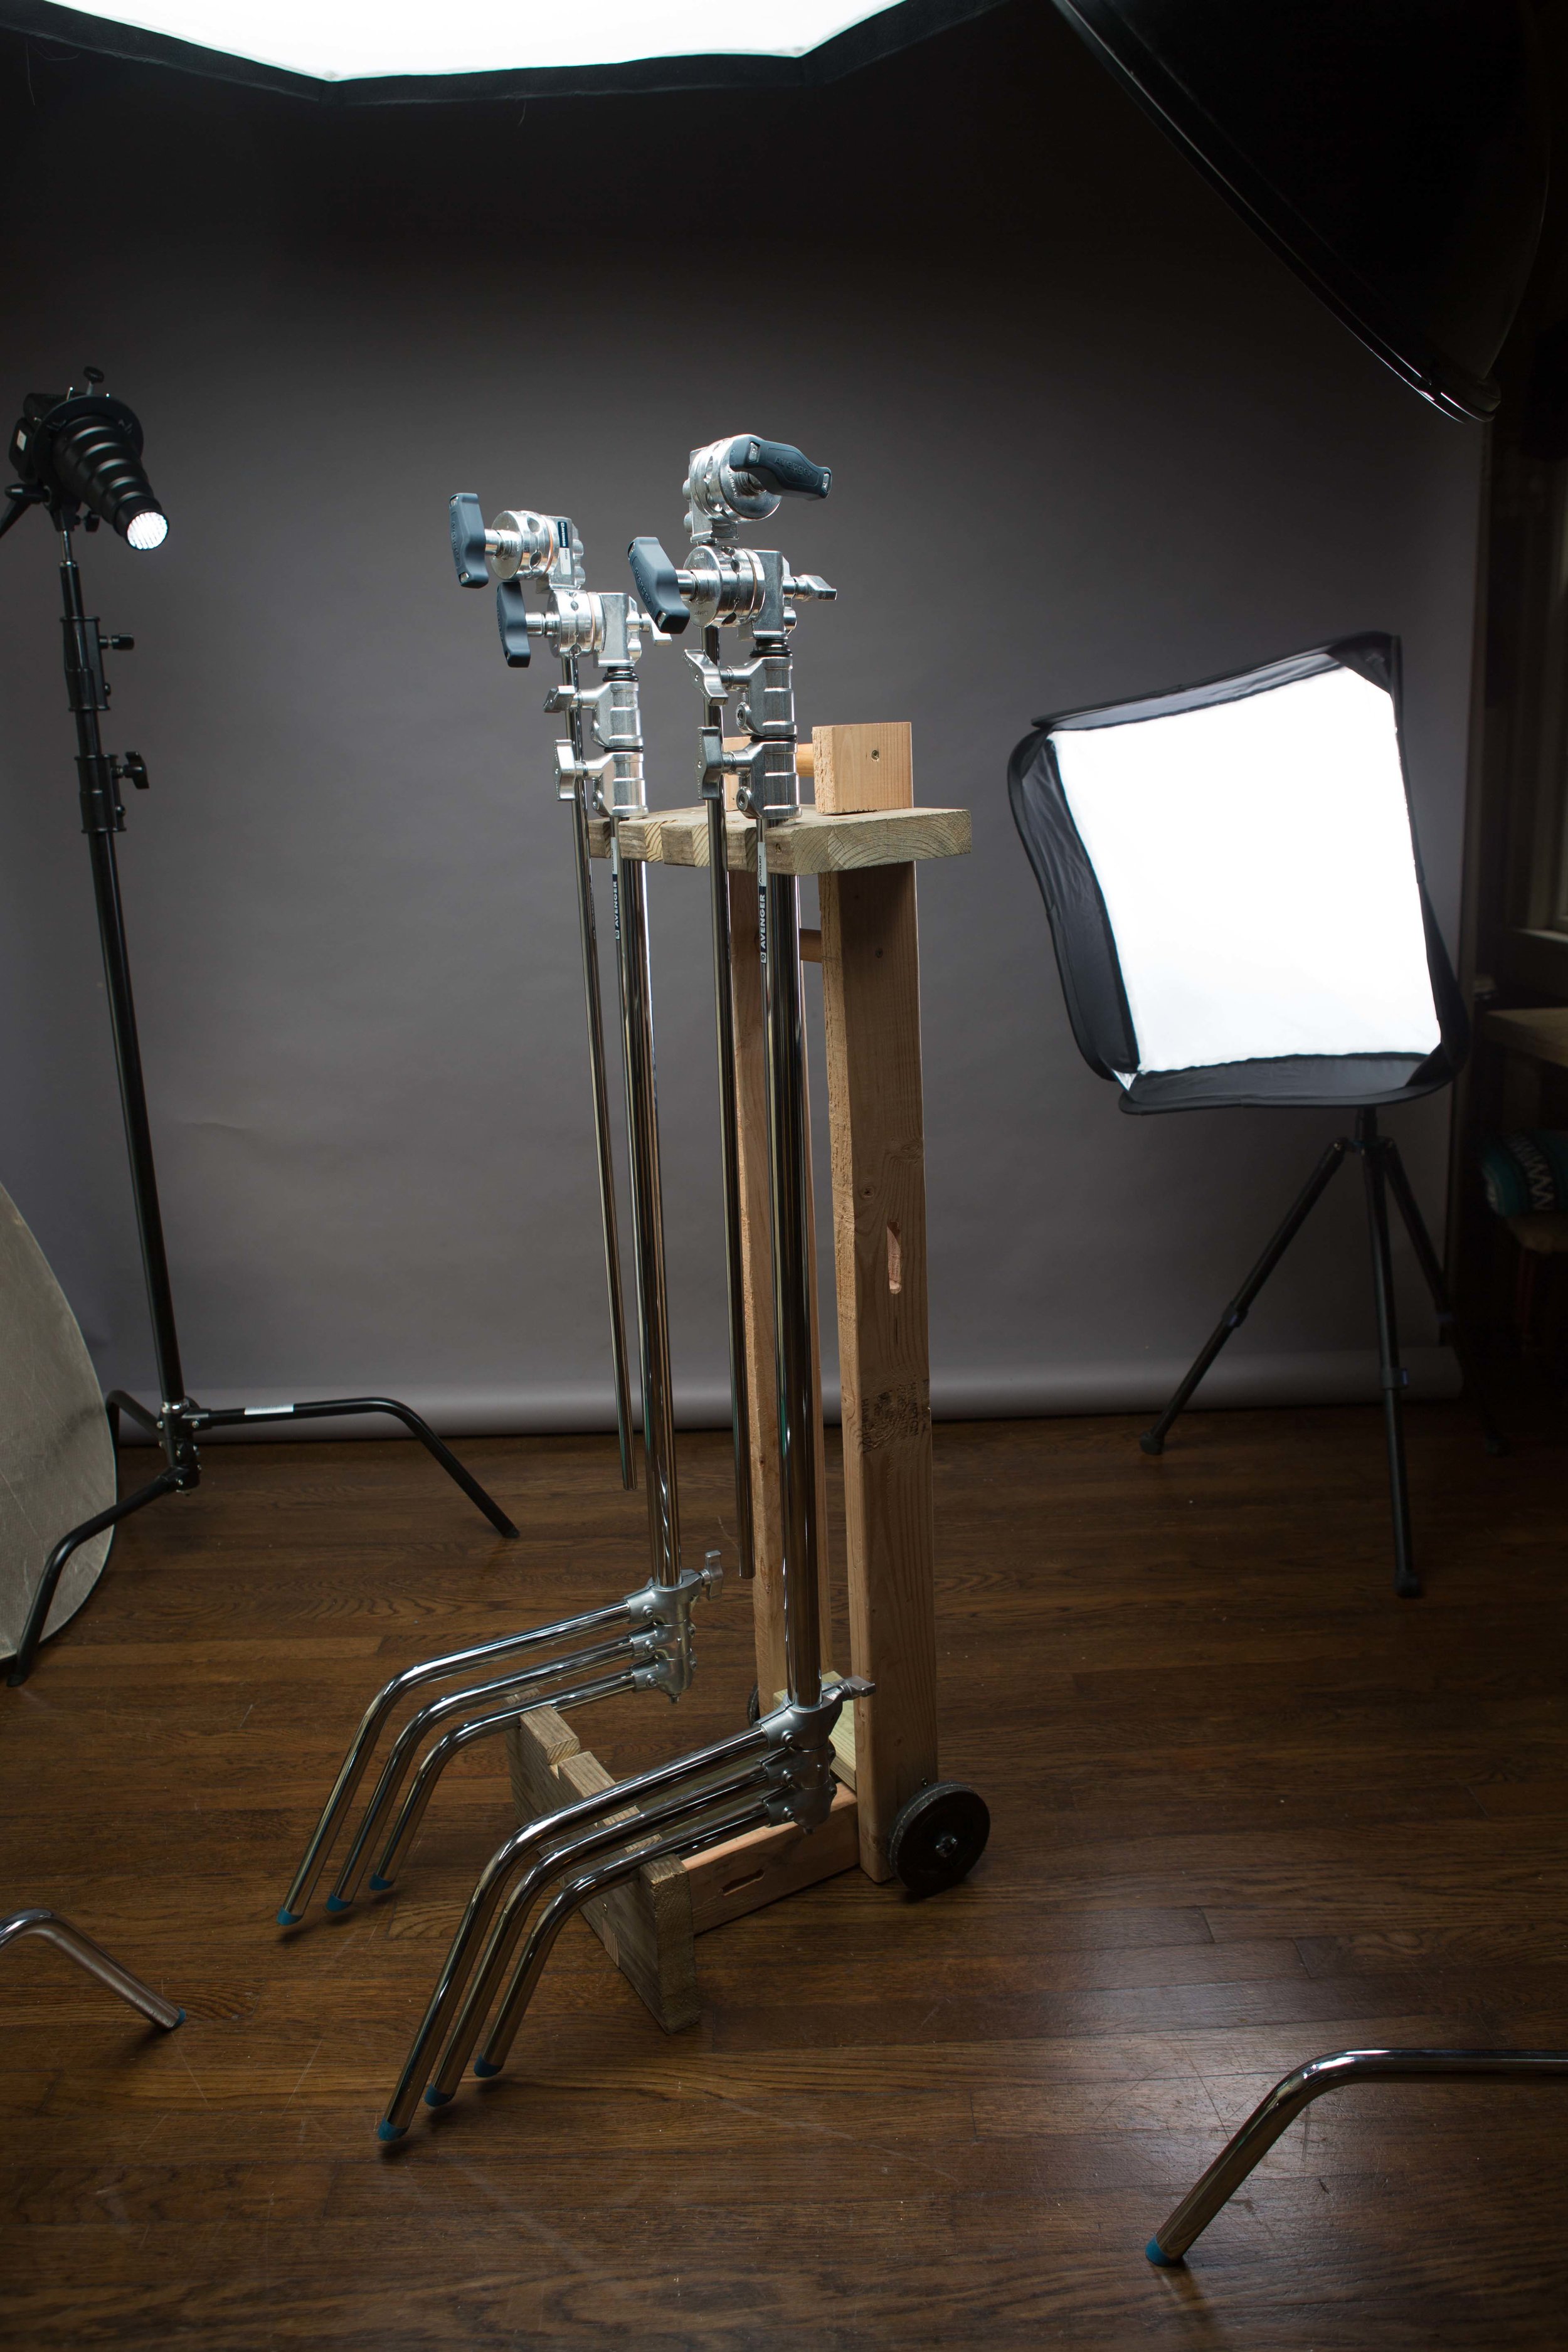 How You Can Turn a C-Stand Into a DIY  Studio